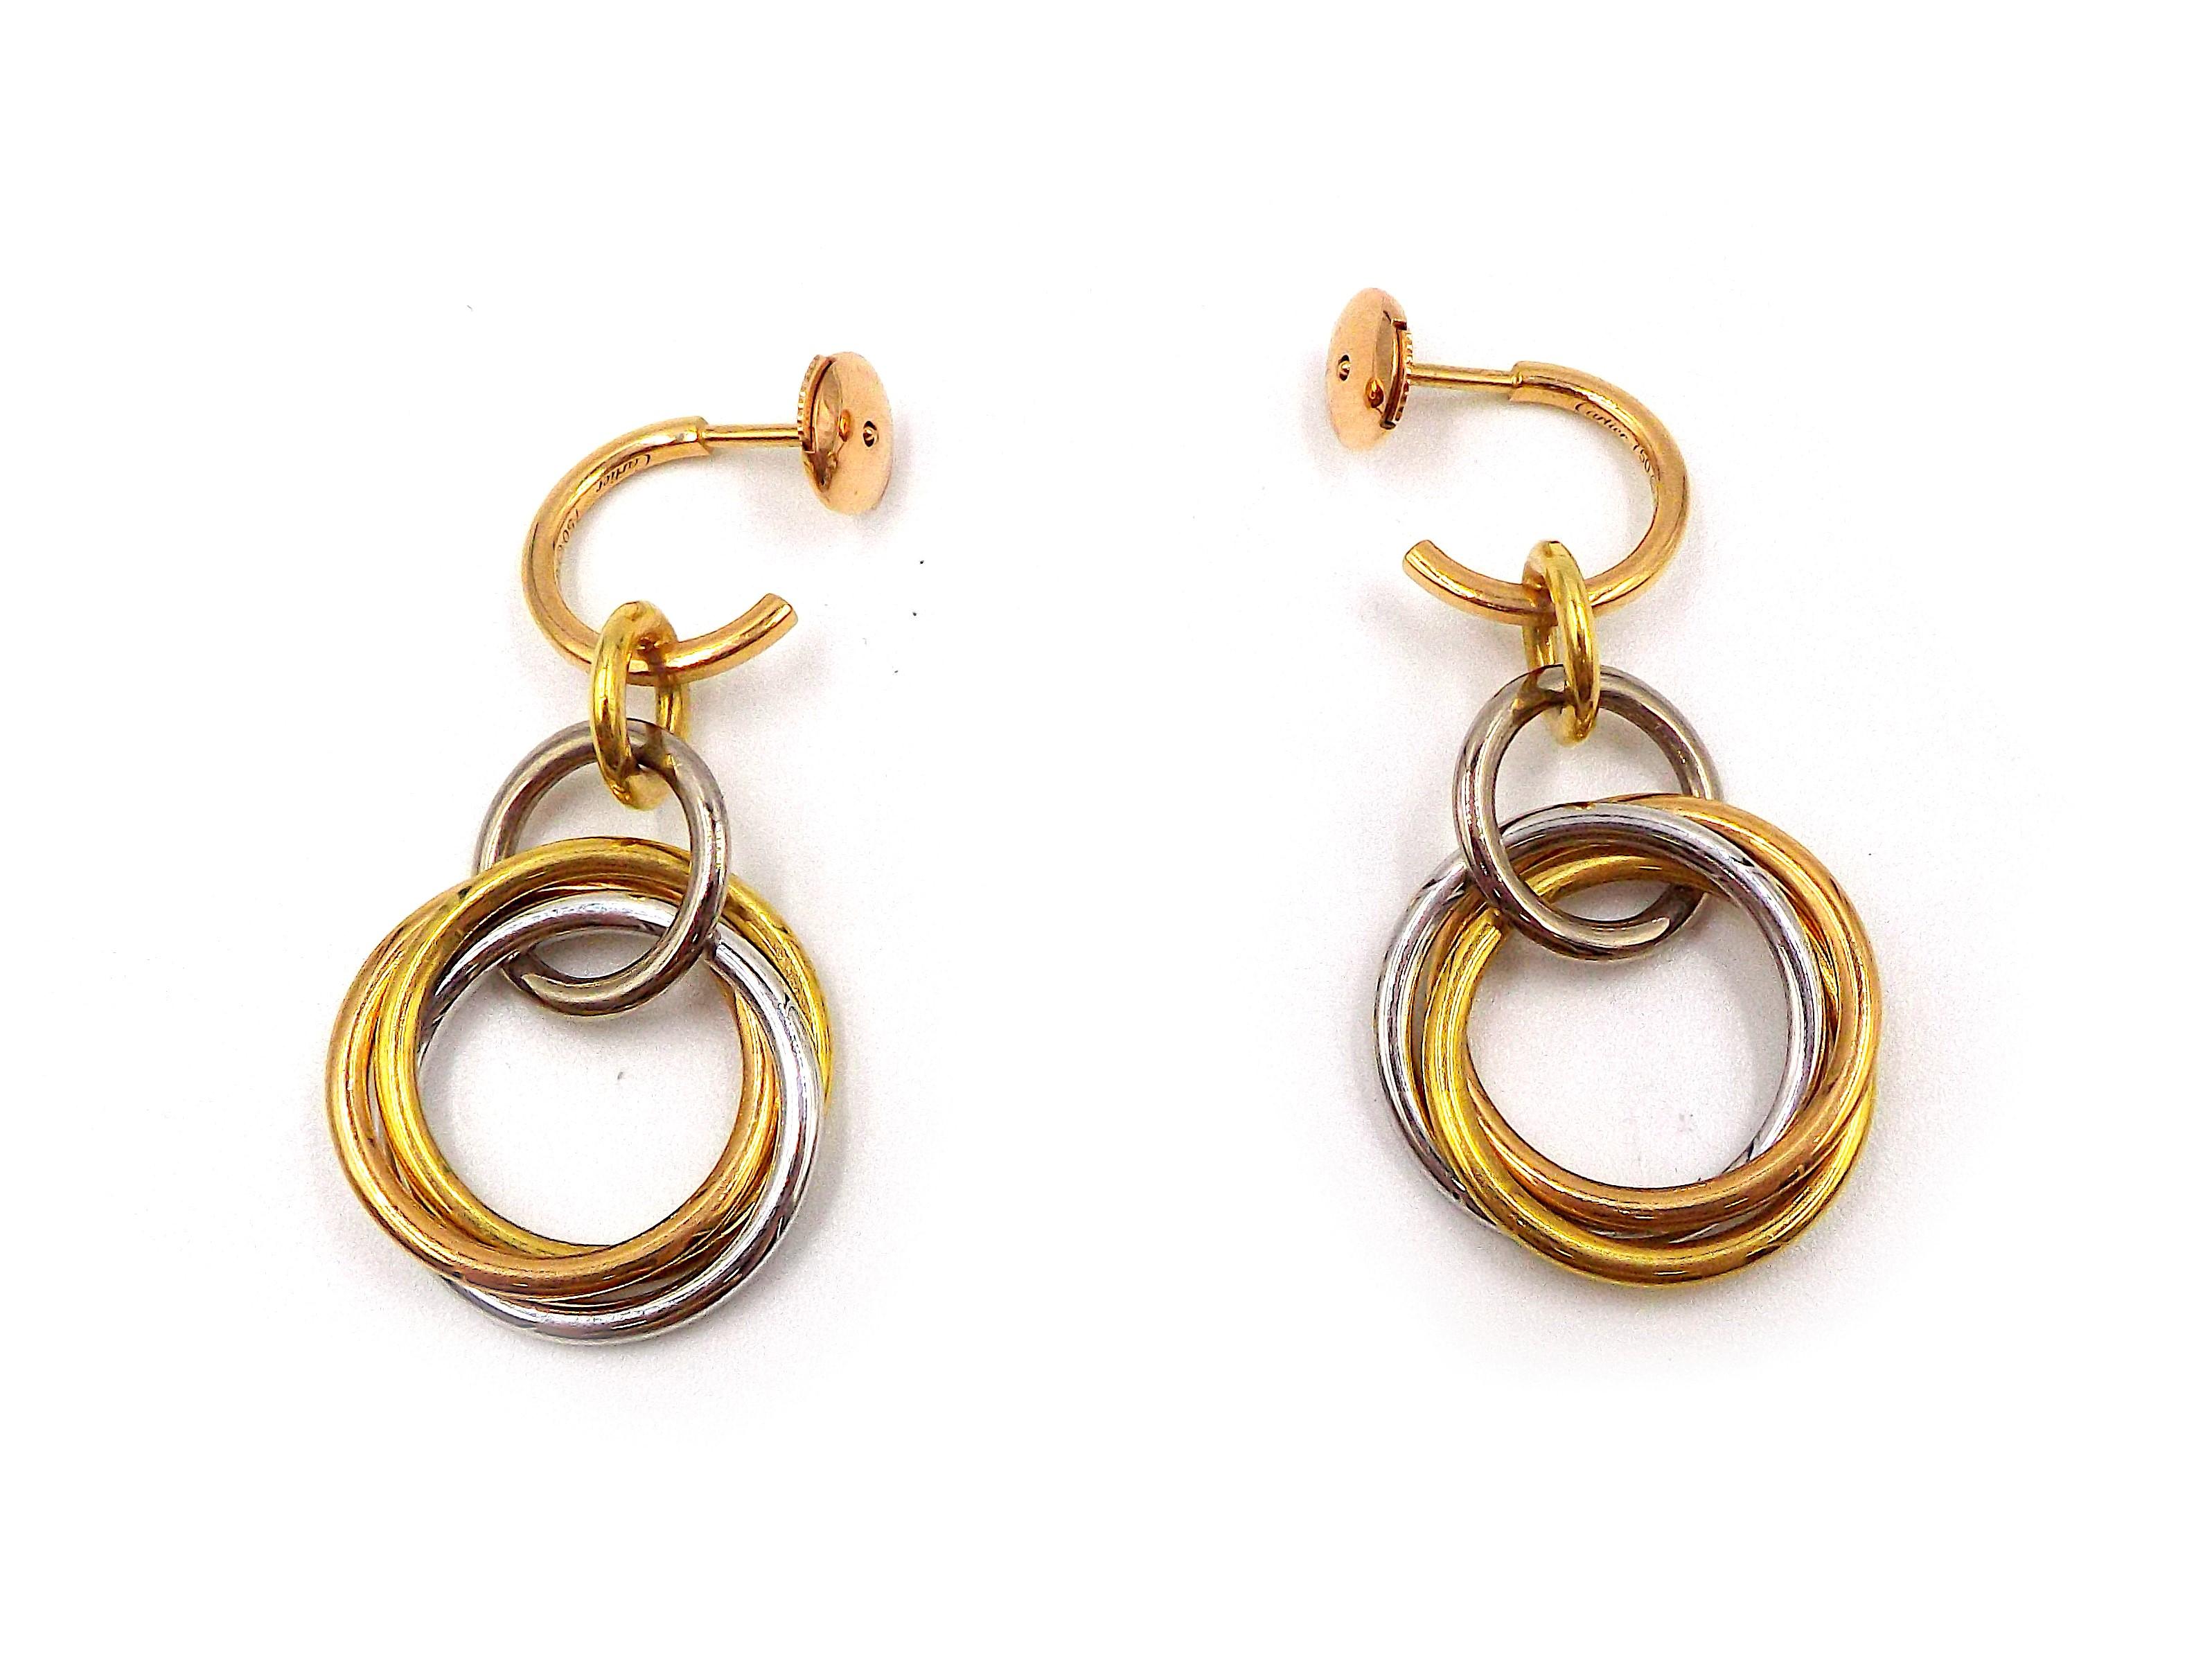 A pair of stylish tri-color gold and diamond earrings by Cartier. Each earring weighs 8.5g, dimensions 1.75